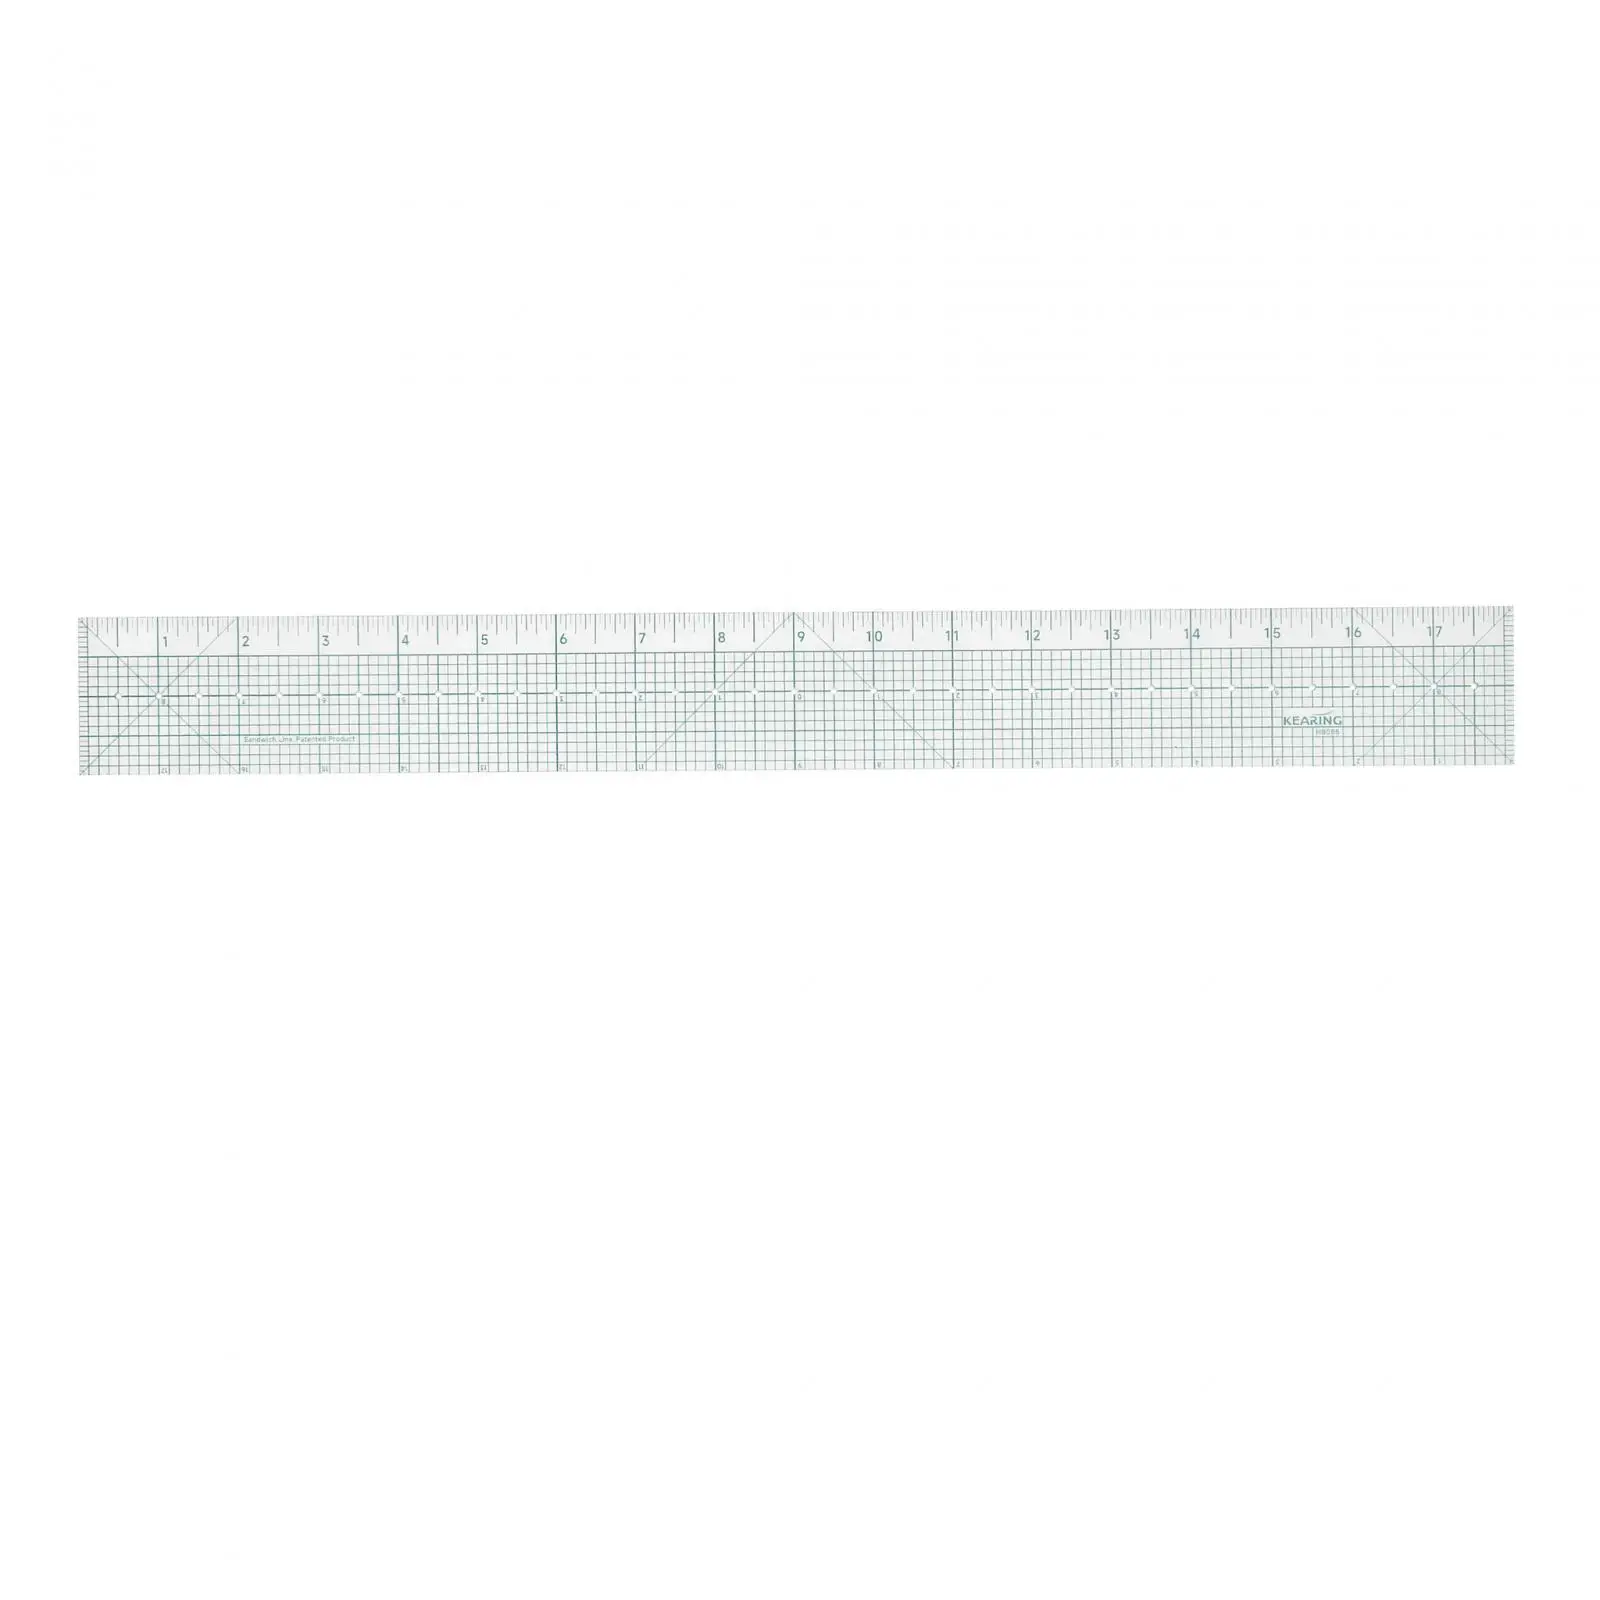 Patchwork Ruler Portable 18inch Durable Grading Rulers Clear Ruler for Tailor Quilting Sewing Clothing Making Measuring Supplies